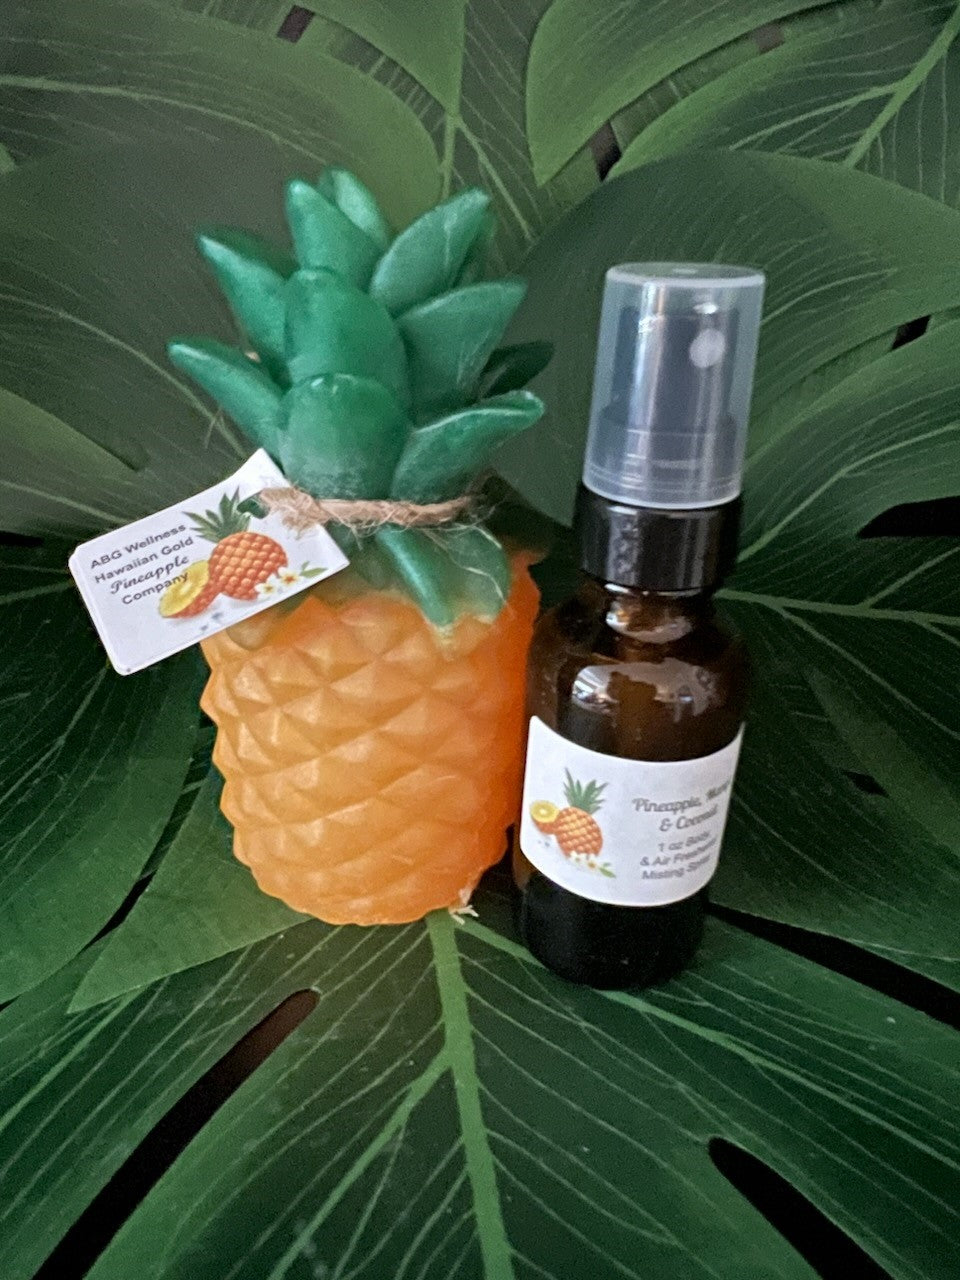 3 Pc Aromatherapy Decorative Vintage VW Van, Pineapple Soap Air Freshener & Misting Spray Gift Set, “MADE TO ORDER” A Gift For Any Occasion